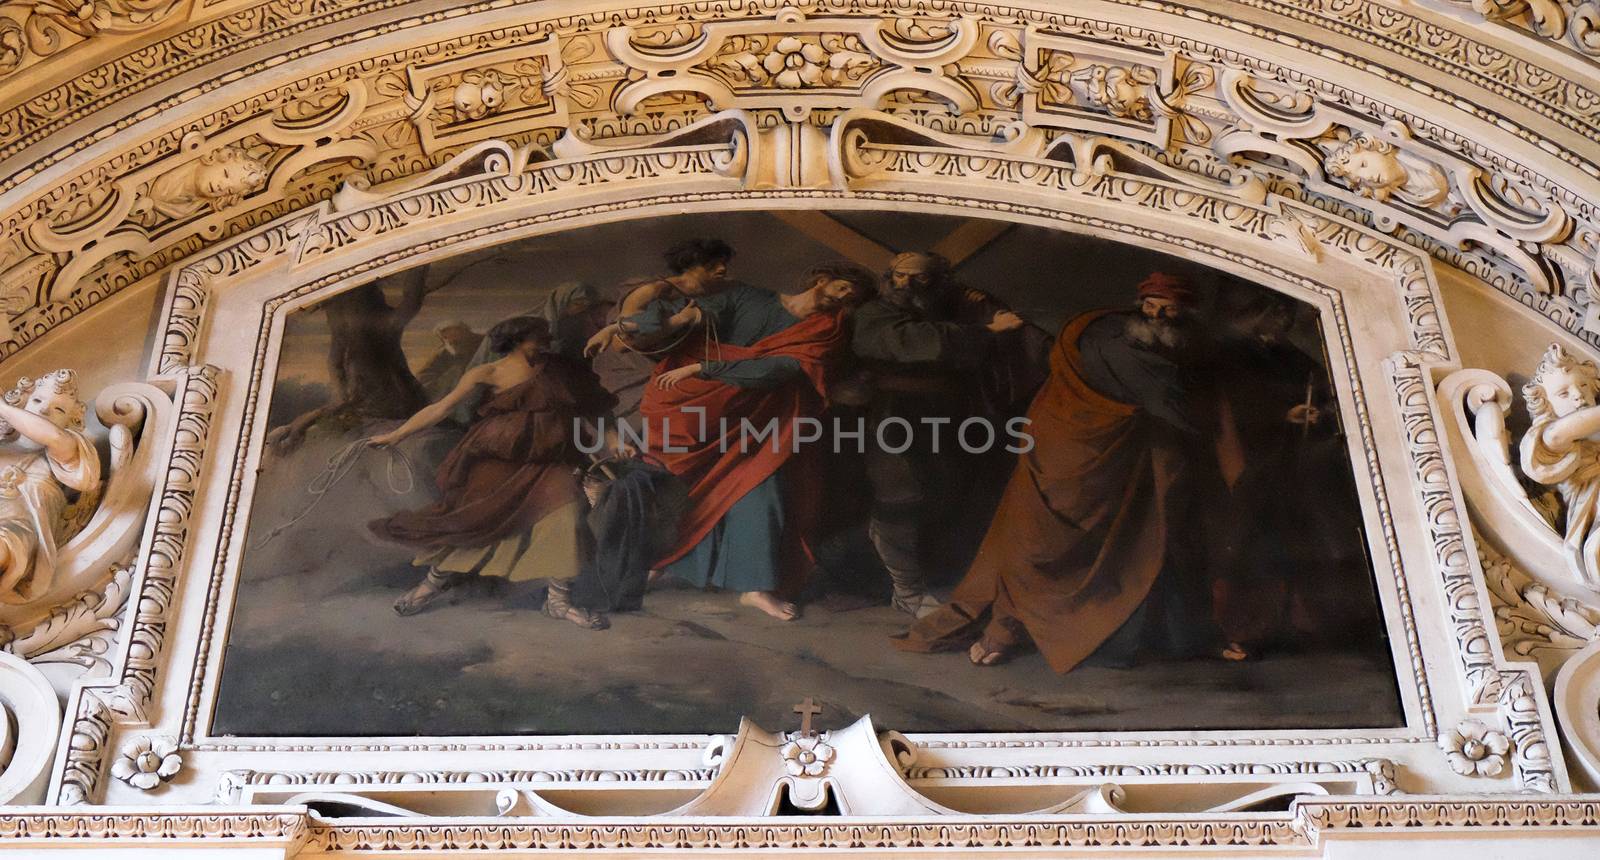 5th Stations of the Cross, Simon of Cyrene carries the cross, fragment of the dome in Salzburg Cathedral by atlas